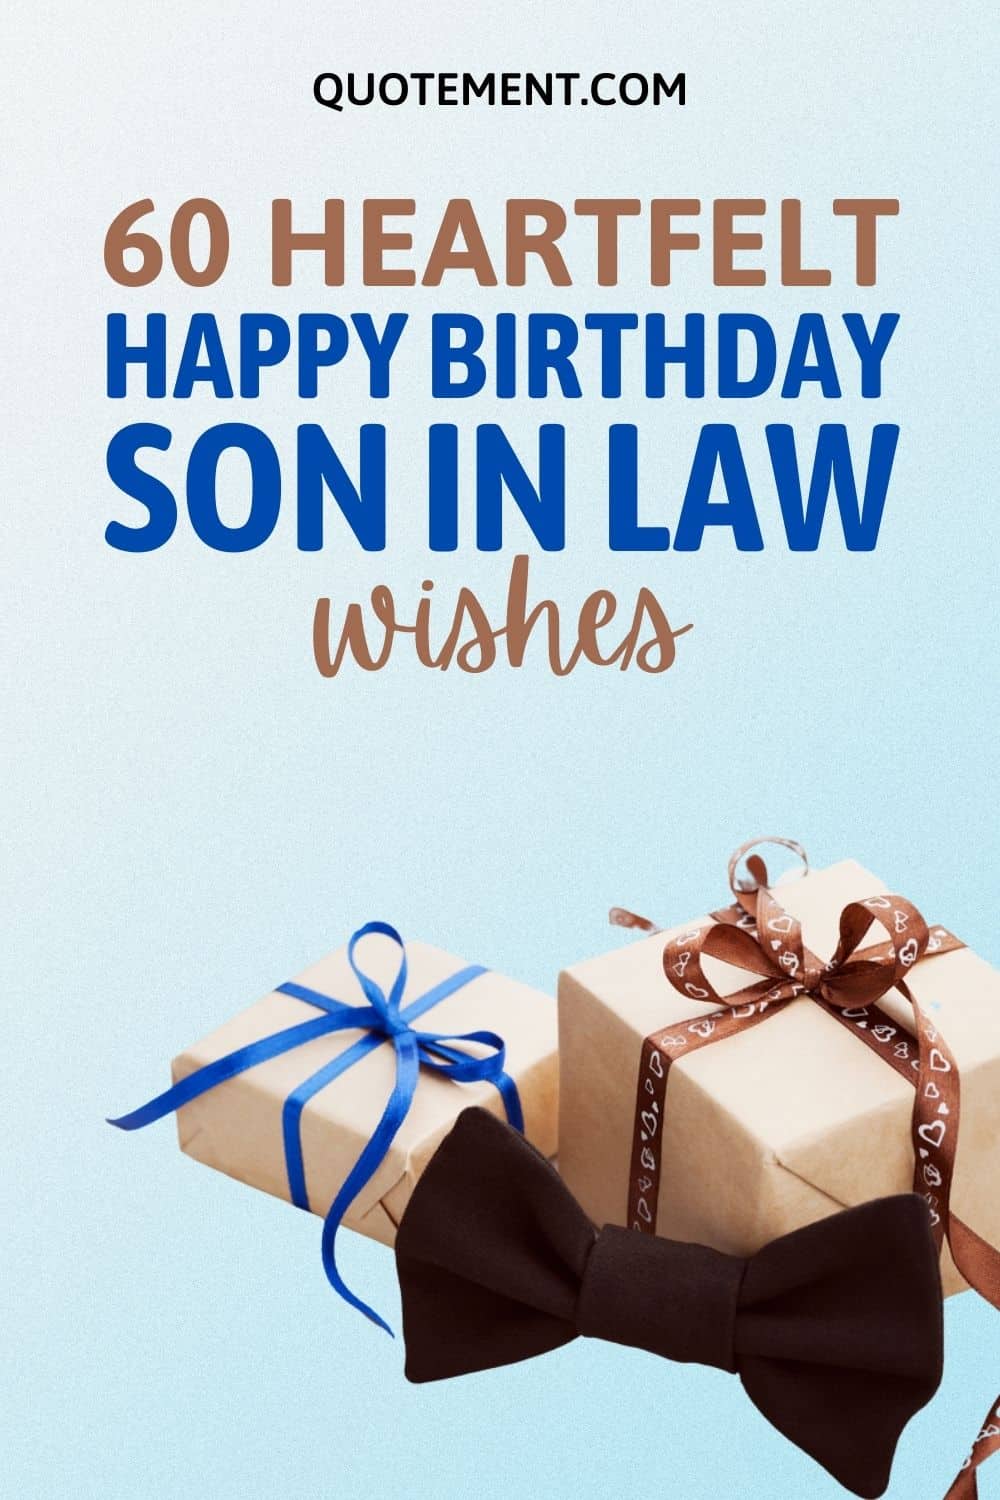 List Of 60 Warmest Happy Birthday Son In Law Wishes
